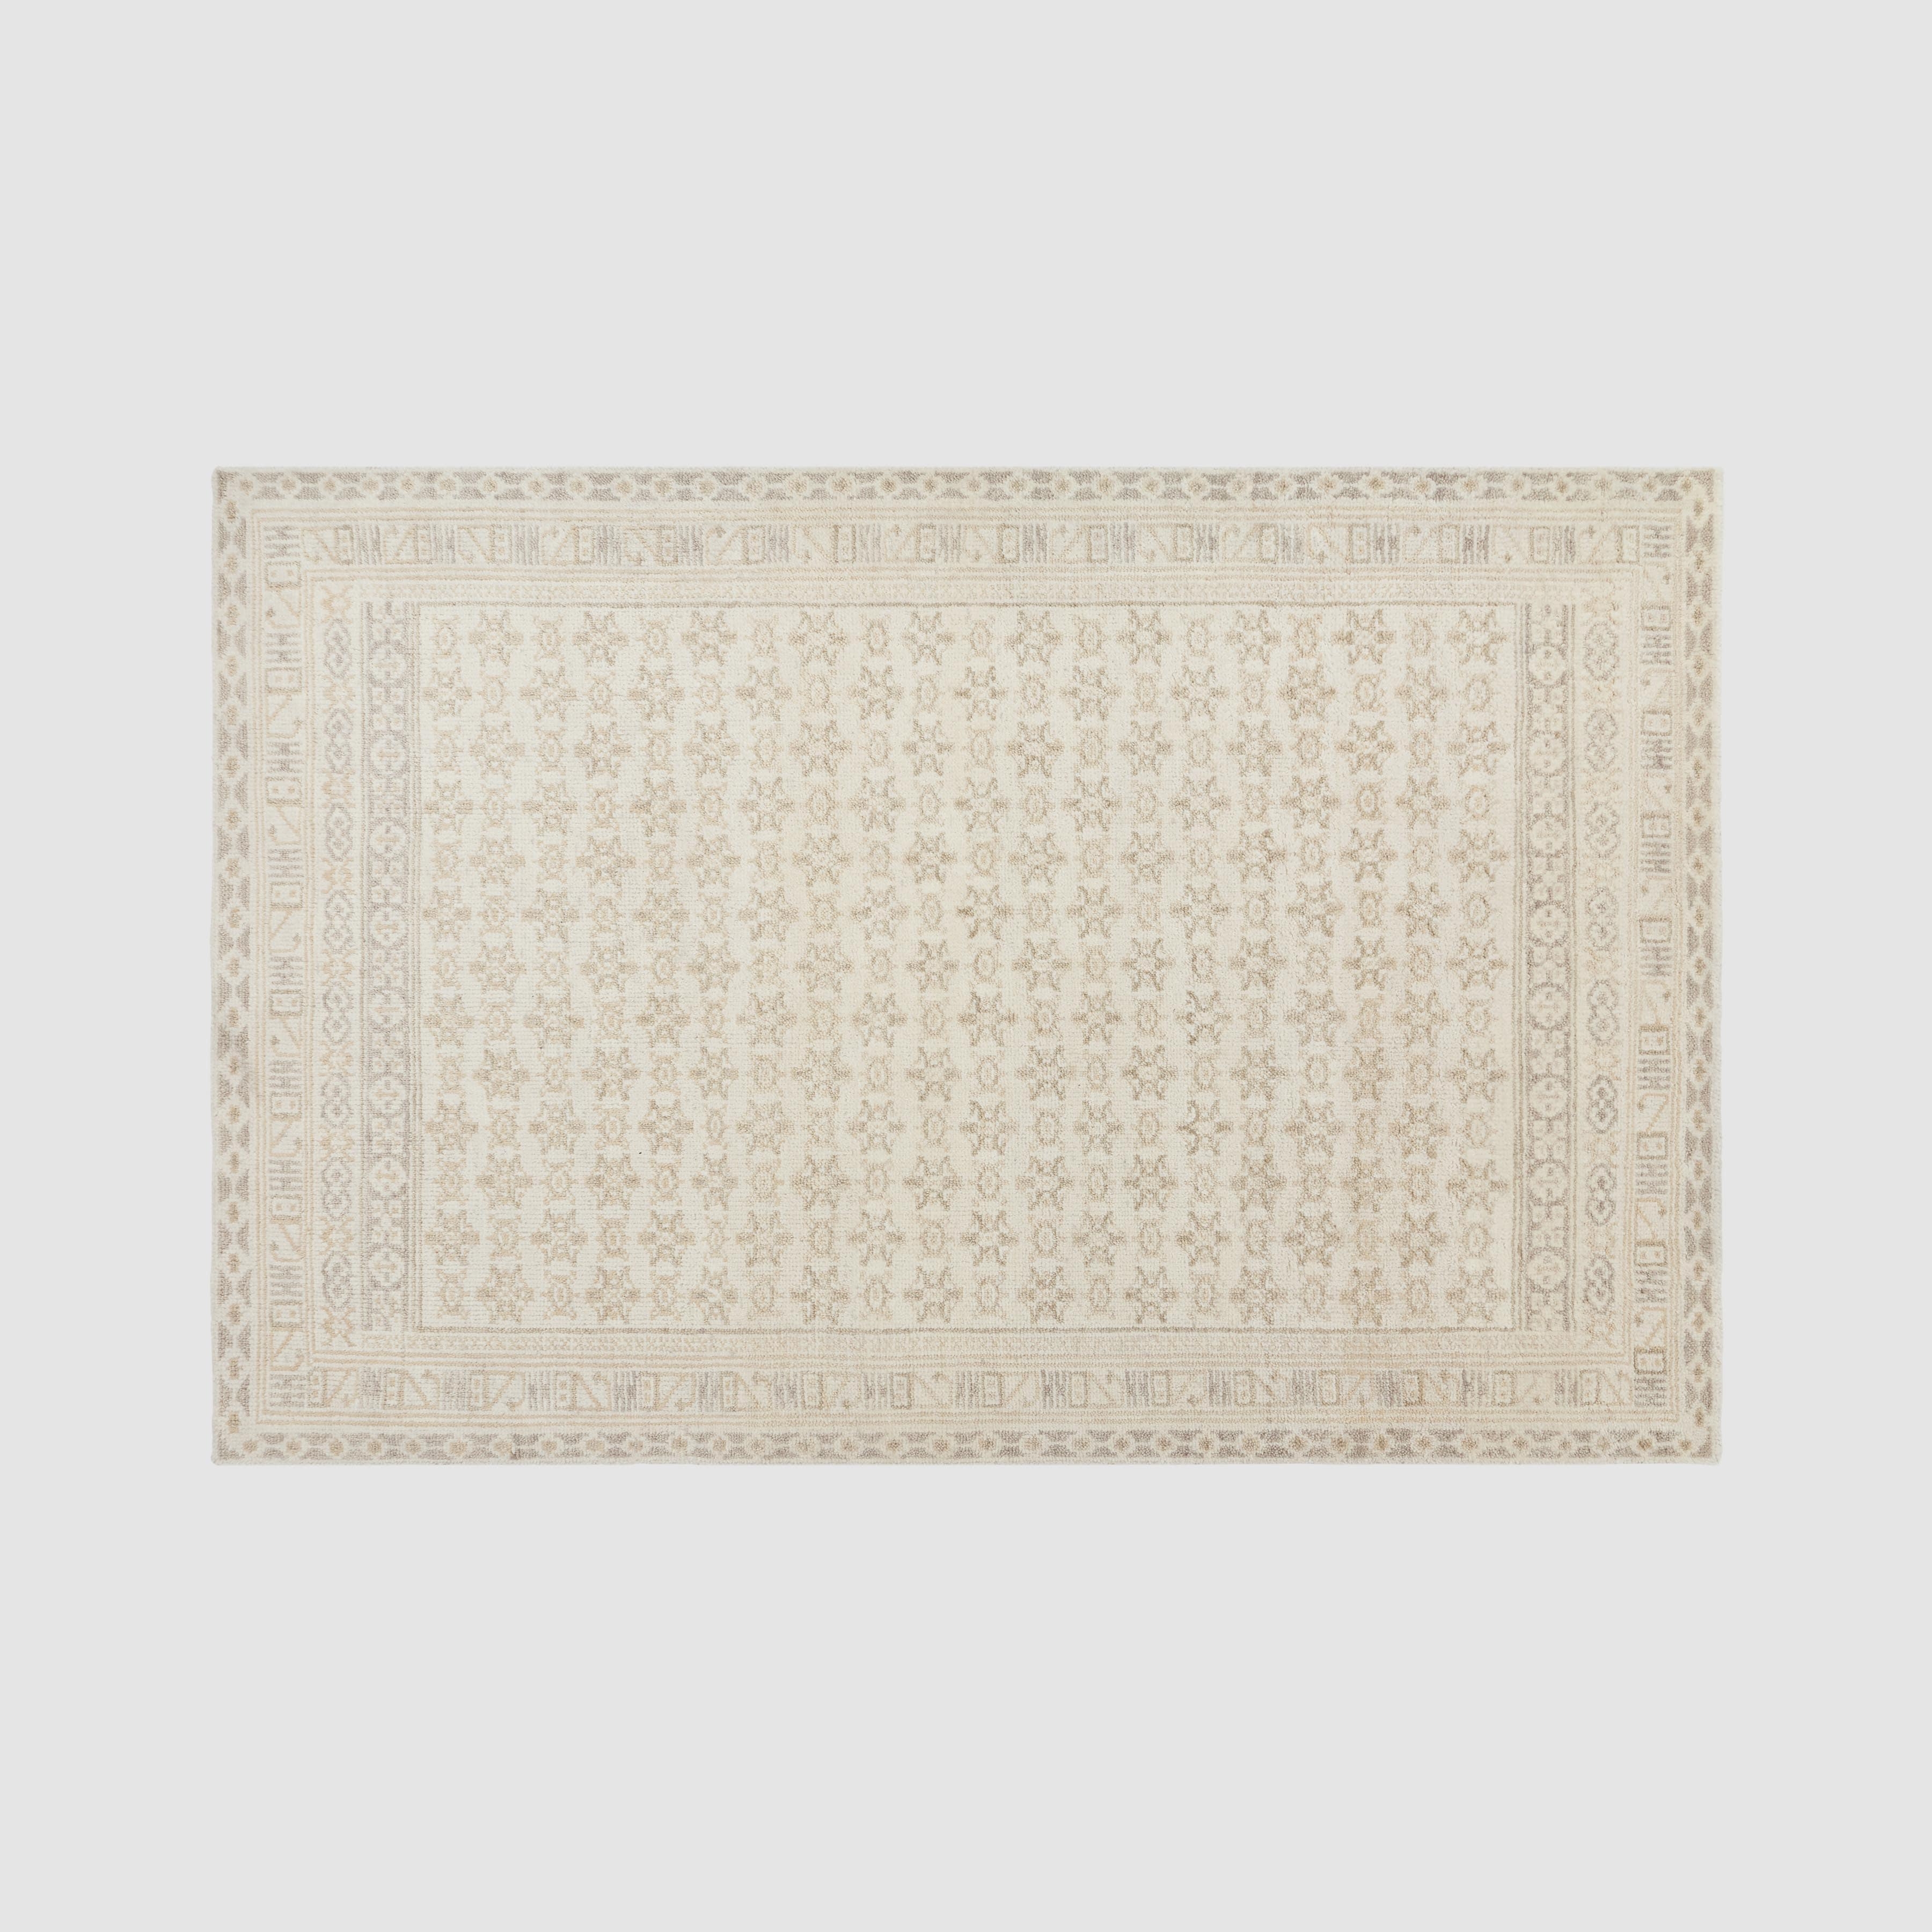 The Citizenry Lahar Hand-Knotted Area Rug | 8' x 10' | Ecru - Image 4